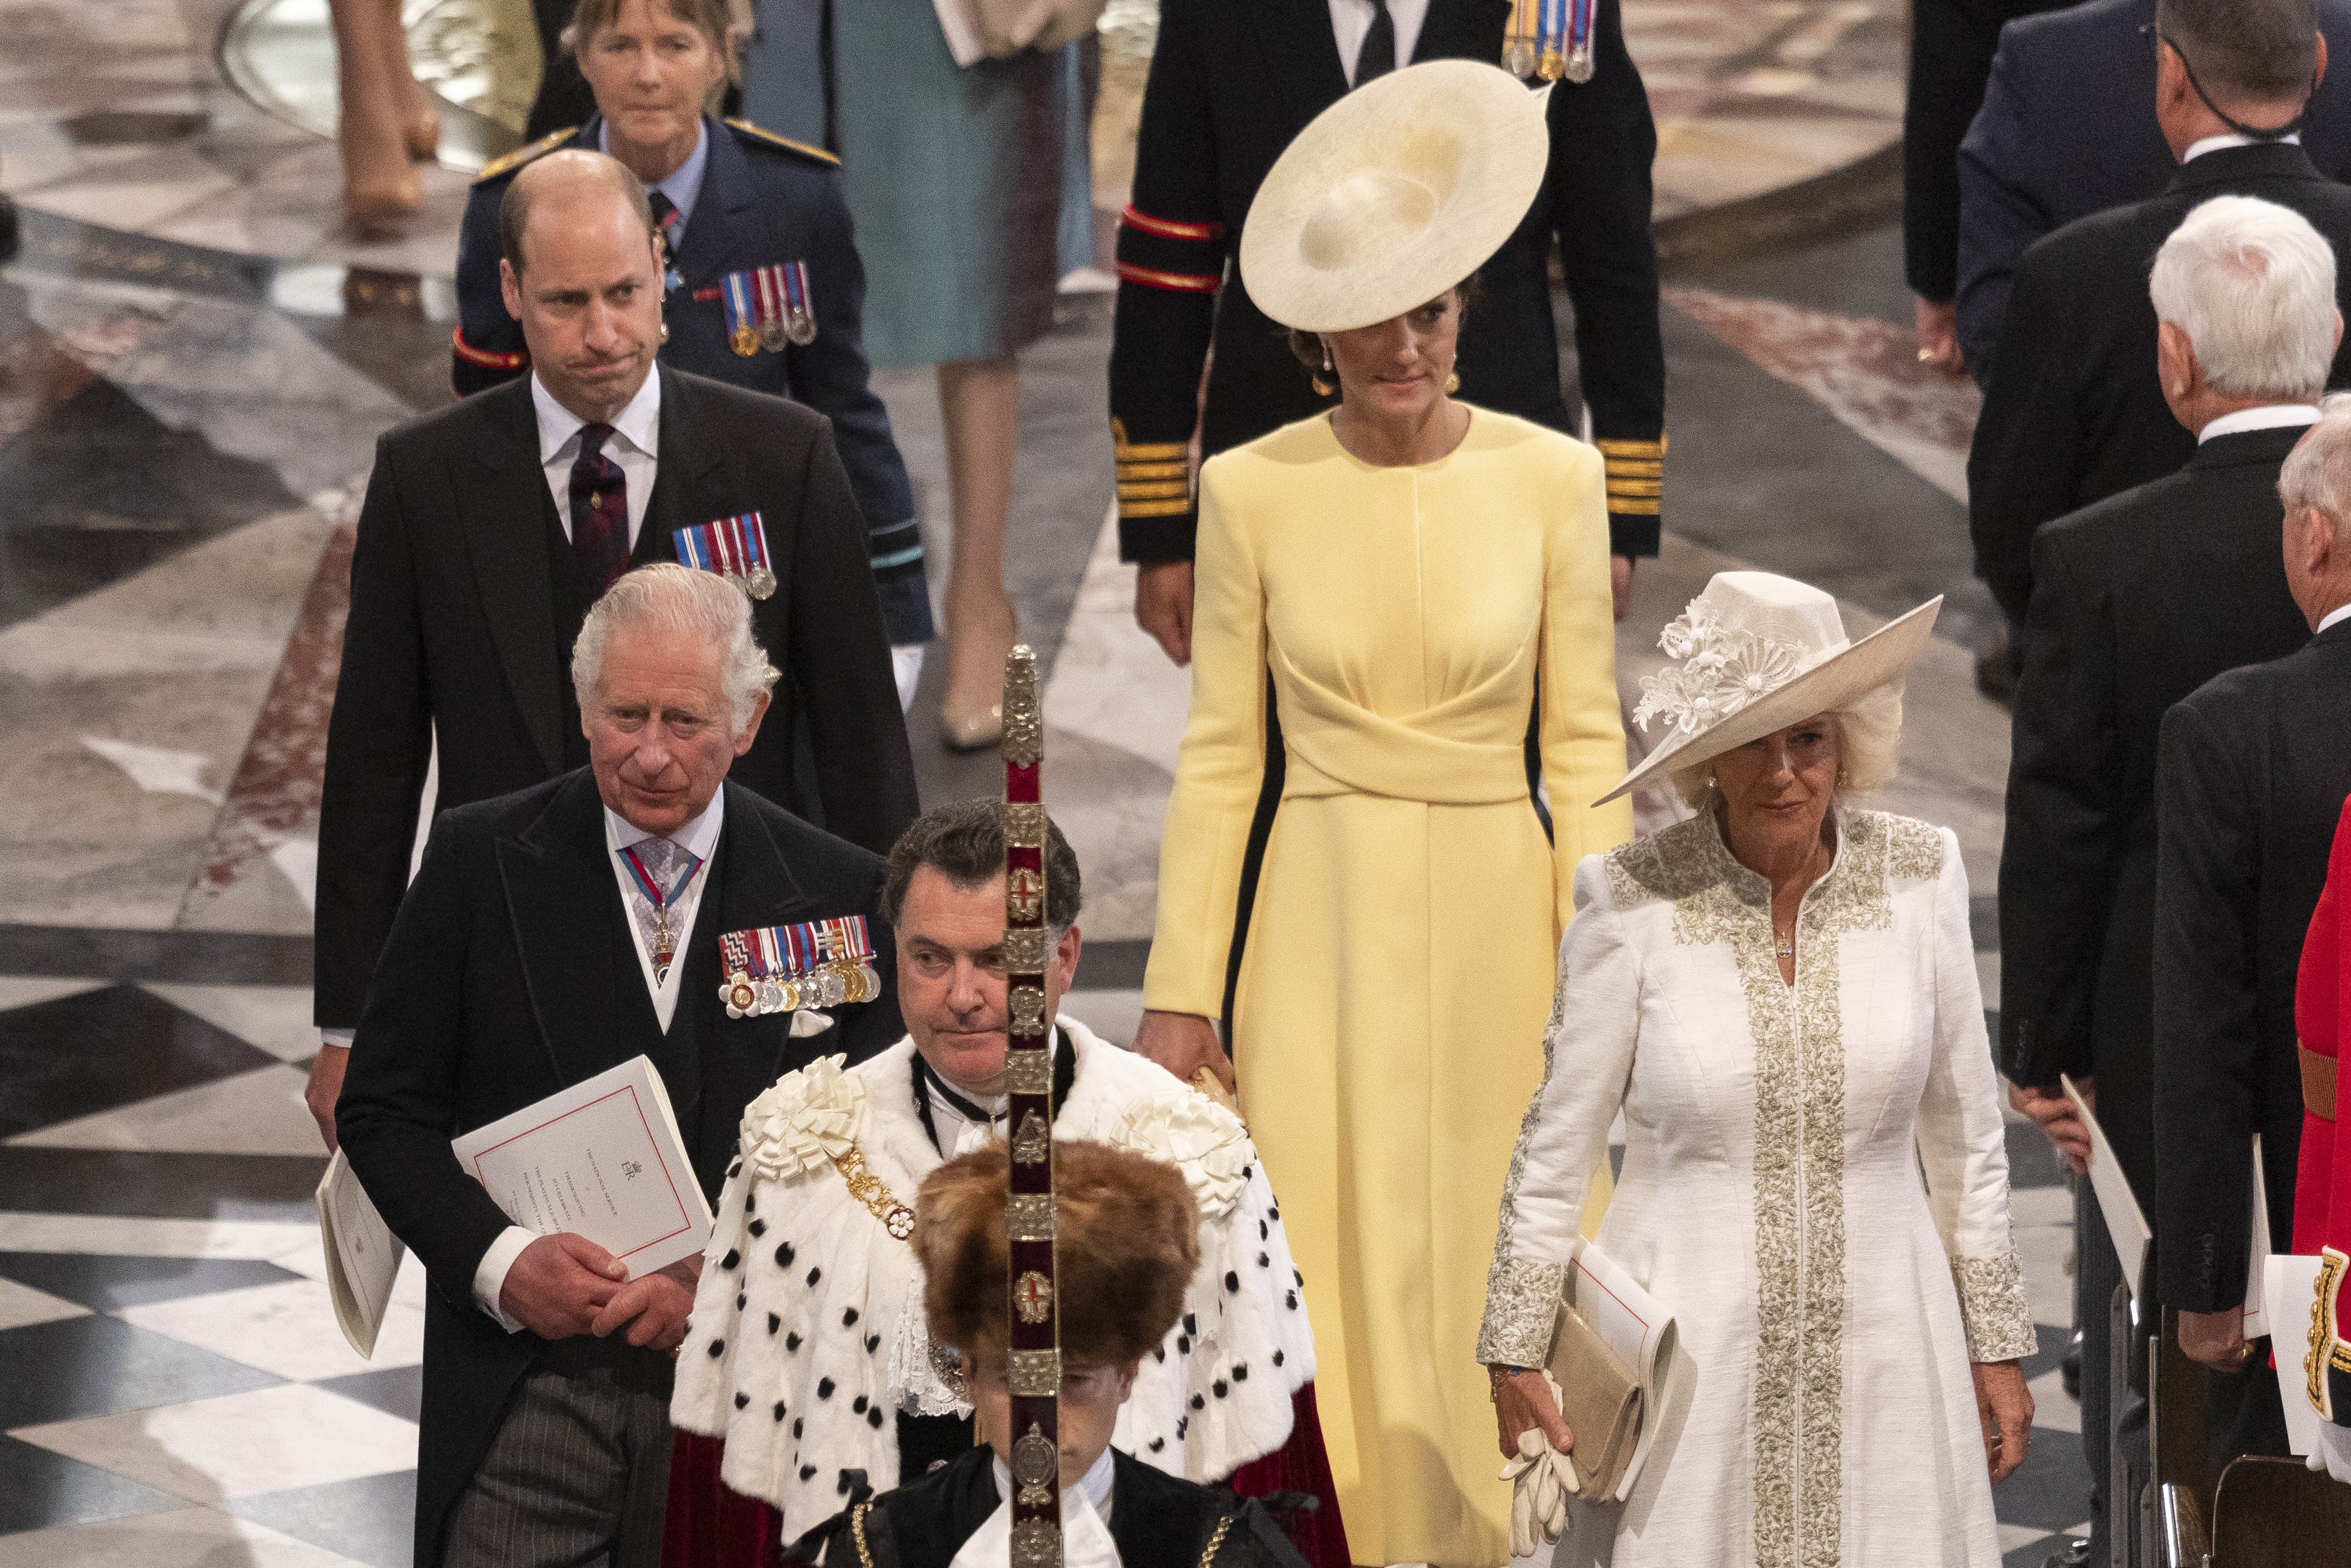 Prince William and Kate, Duke and Duchess of Cambridge, King Charles III, and Camilla, Duchess of Cornwall at the St. Paul's Cathedral on June 3, 2022, in London, England. | Source: Getty Images